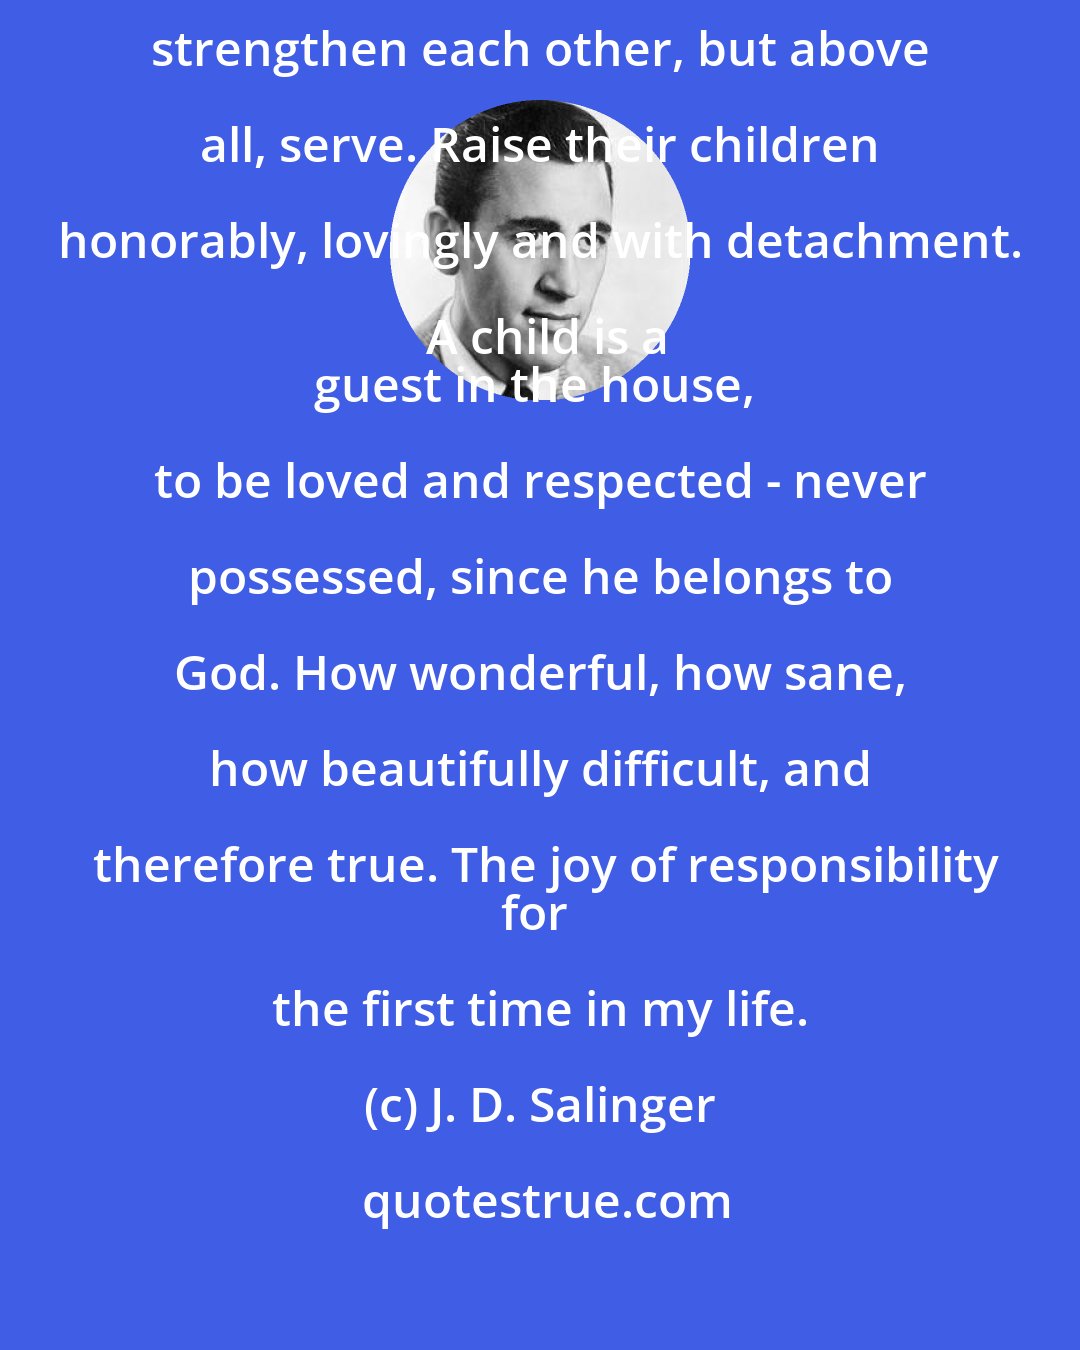 J. D. Salinger: Marriage partners are to serve each other. Elevate, help, teach, strengthen each other, but above all, serve. Raise their children honorably, lovingly and with detachment. A child is a
guest in the house, to be loved and respected - never possessed, since he belongs to God. How wonderful, how sane, how beautifully difficult, and therefore true. The joy of responsibility
for the first time in my life.